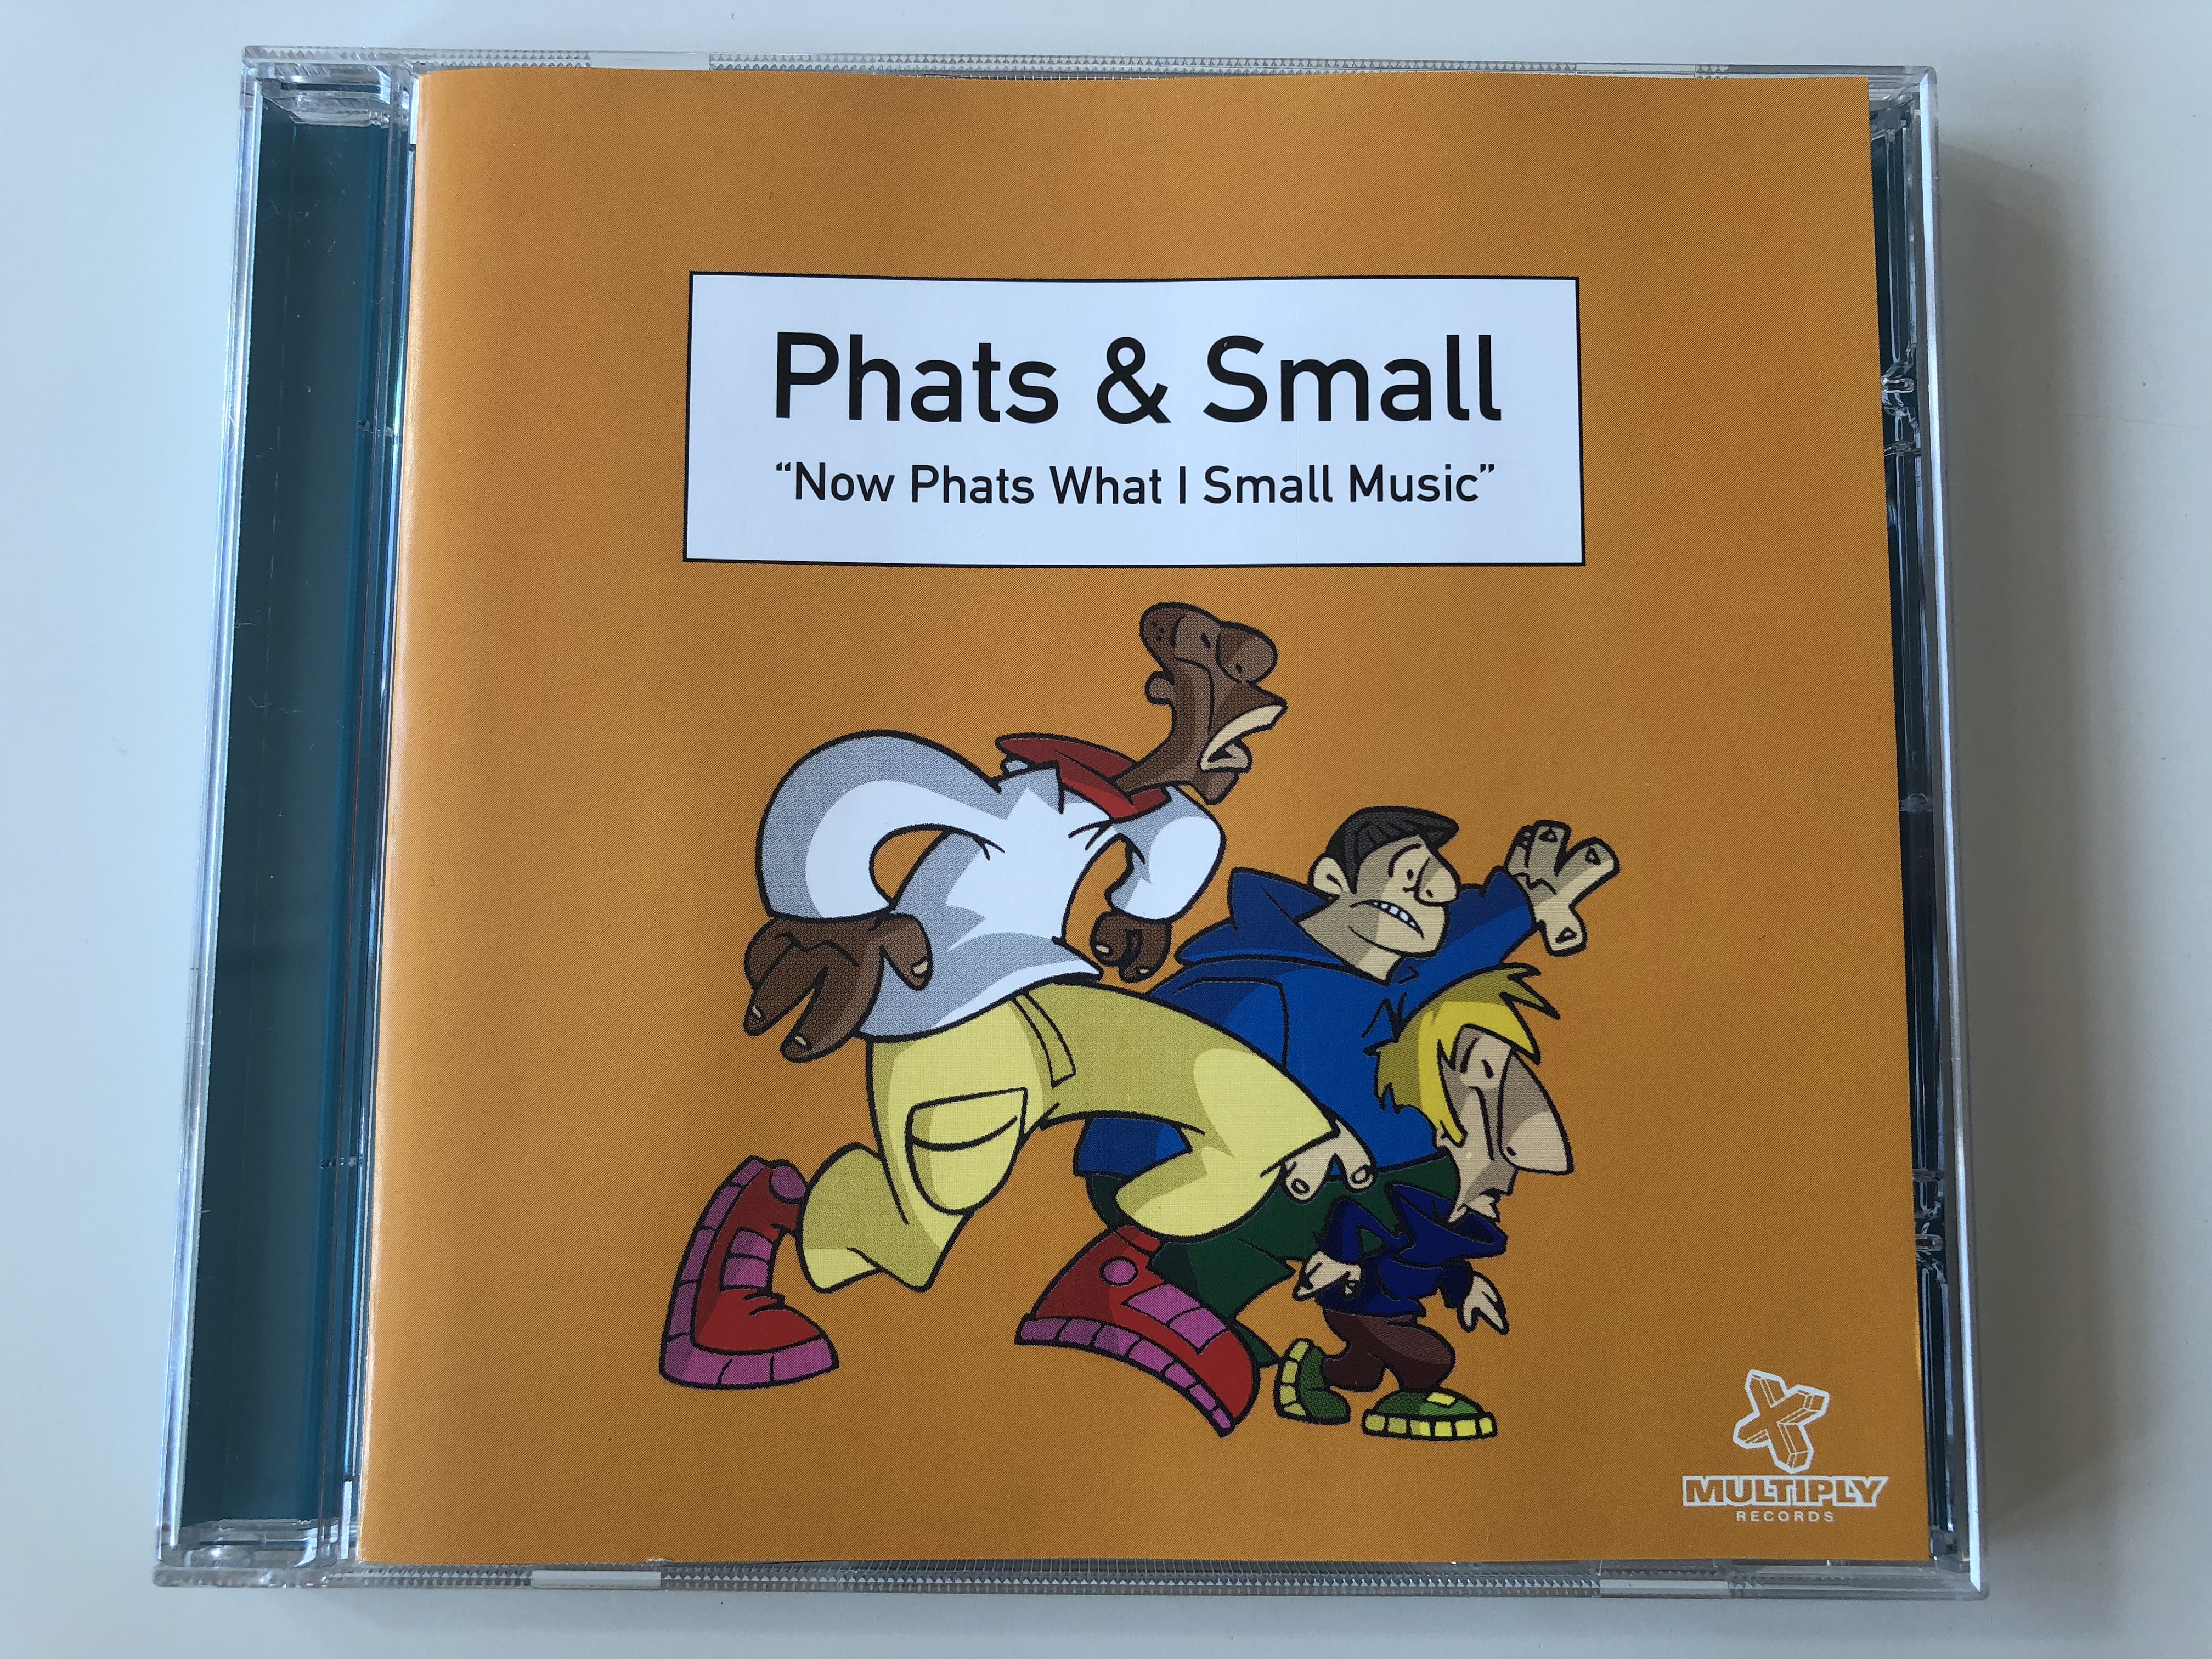 phats-small-now-phats-what-i-small-music-multiply-records-audio-cd-1999-multycd6-1-.jpg